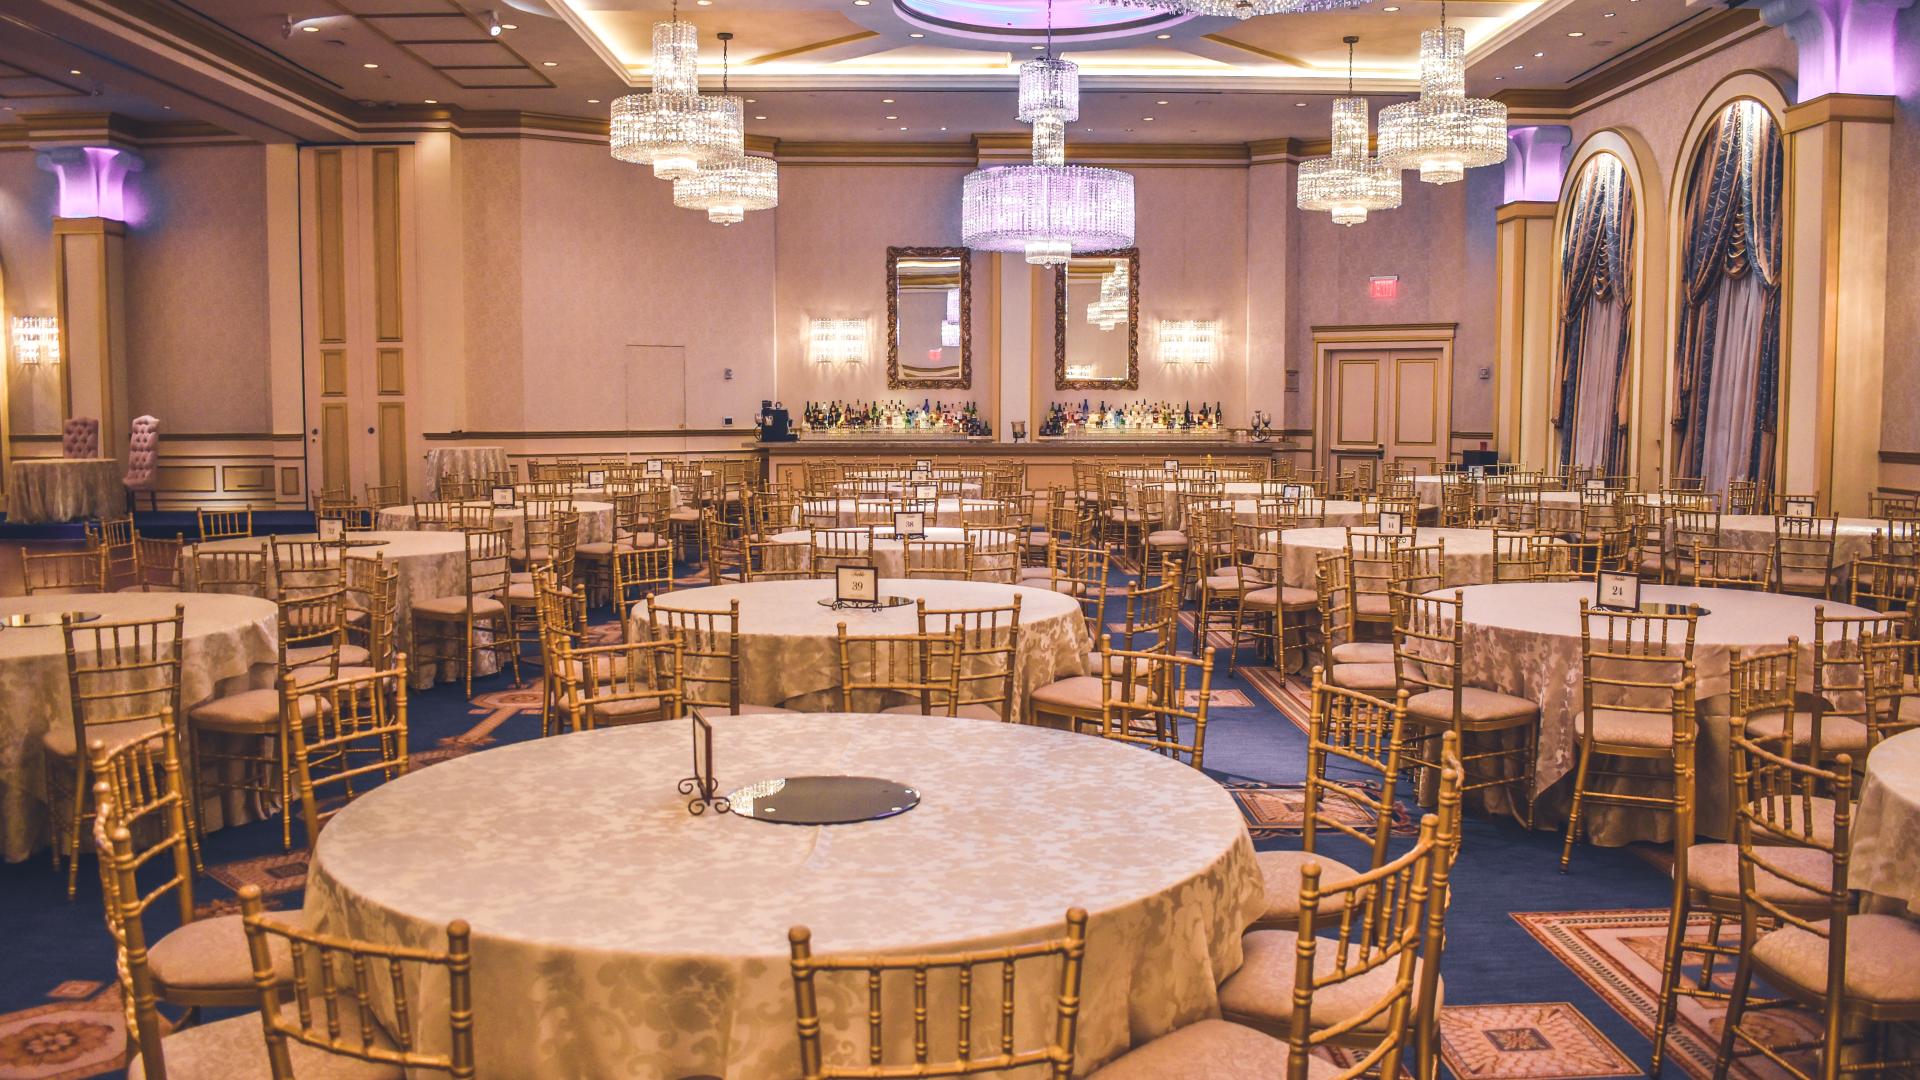 Award Ceremony Venues for Rent in Los Angeles, CA